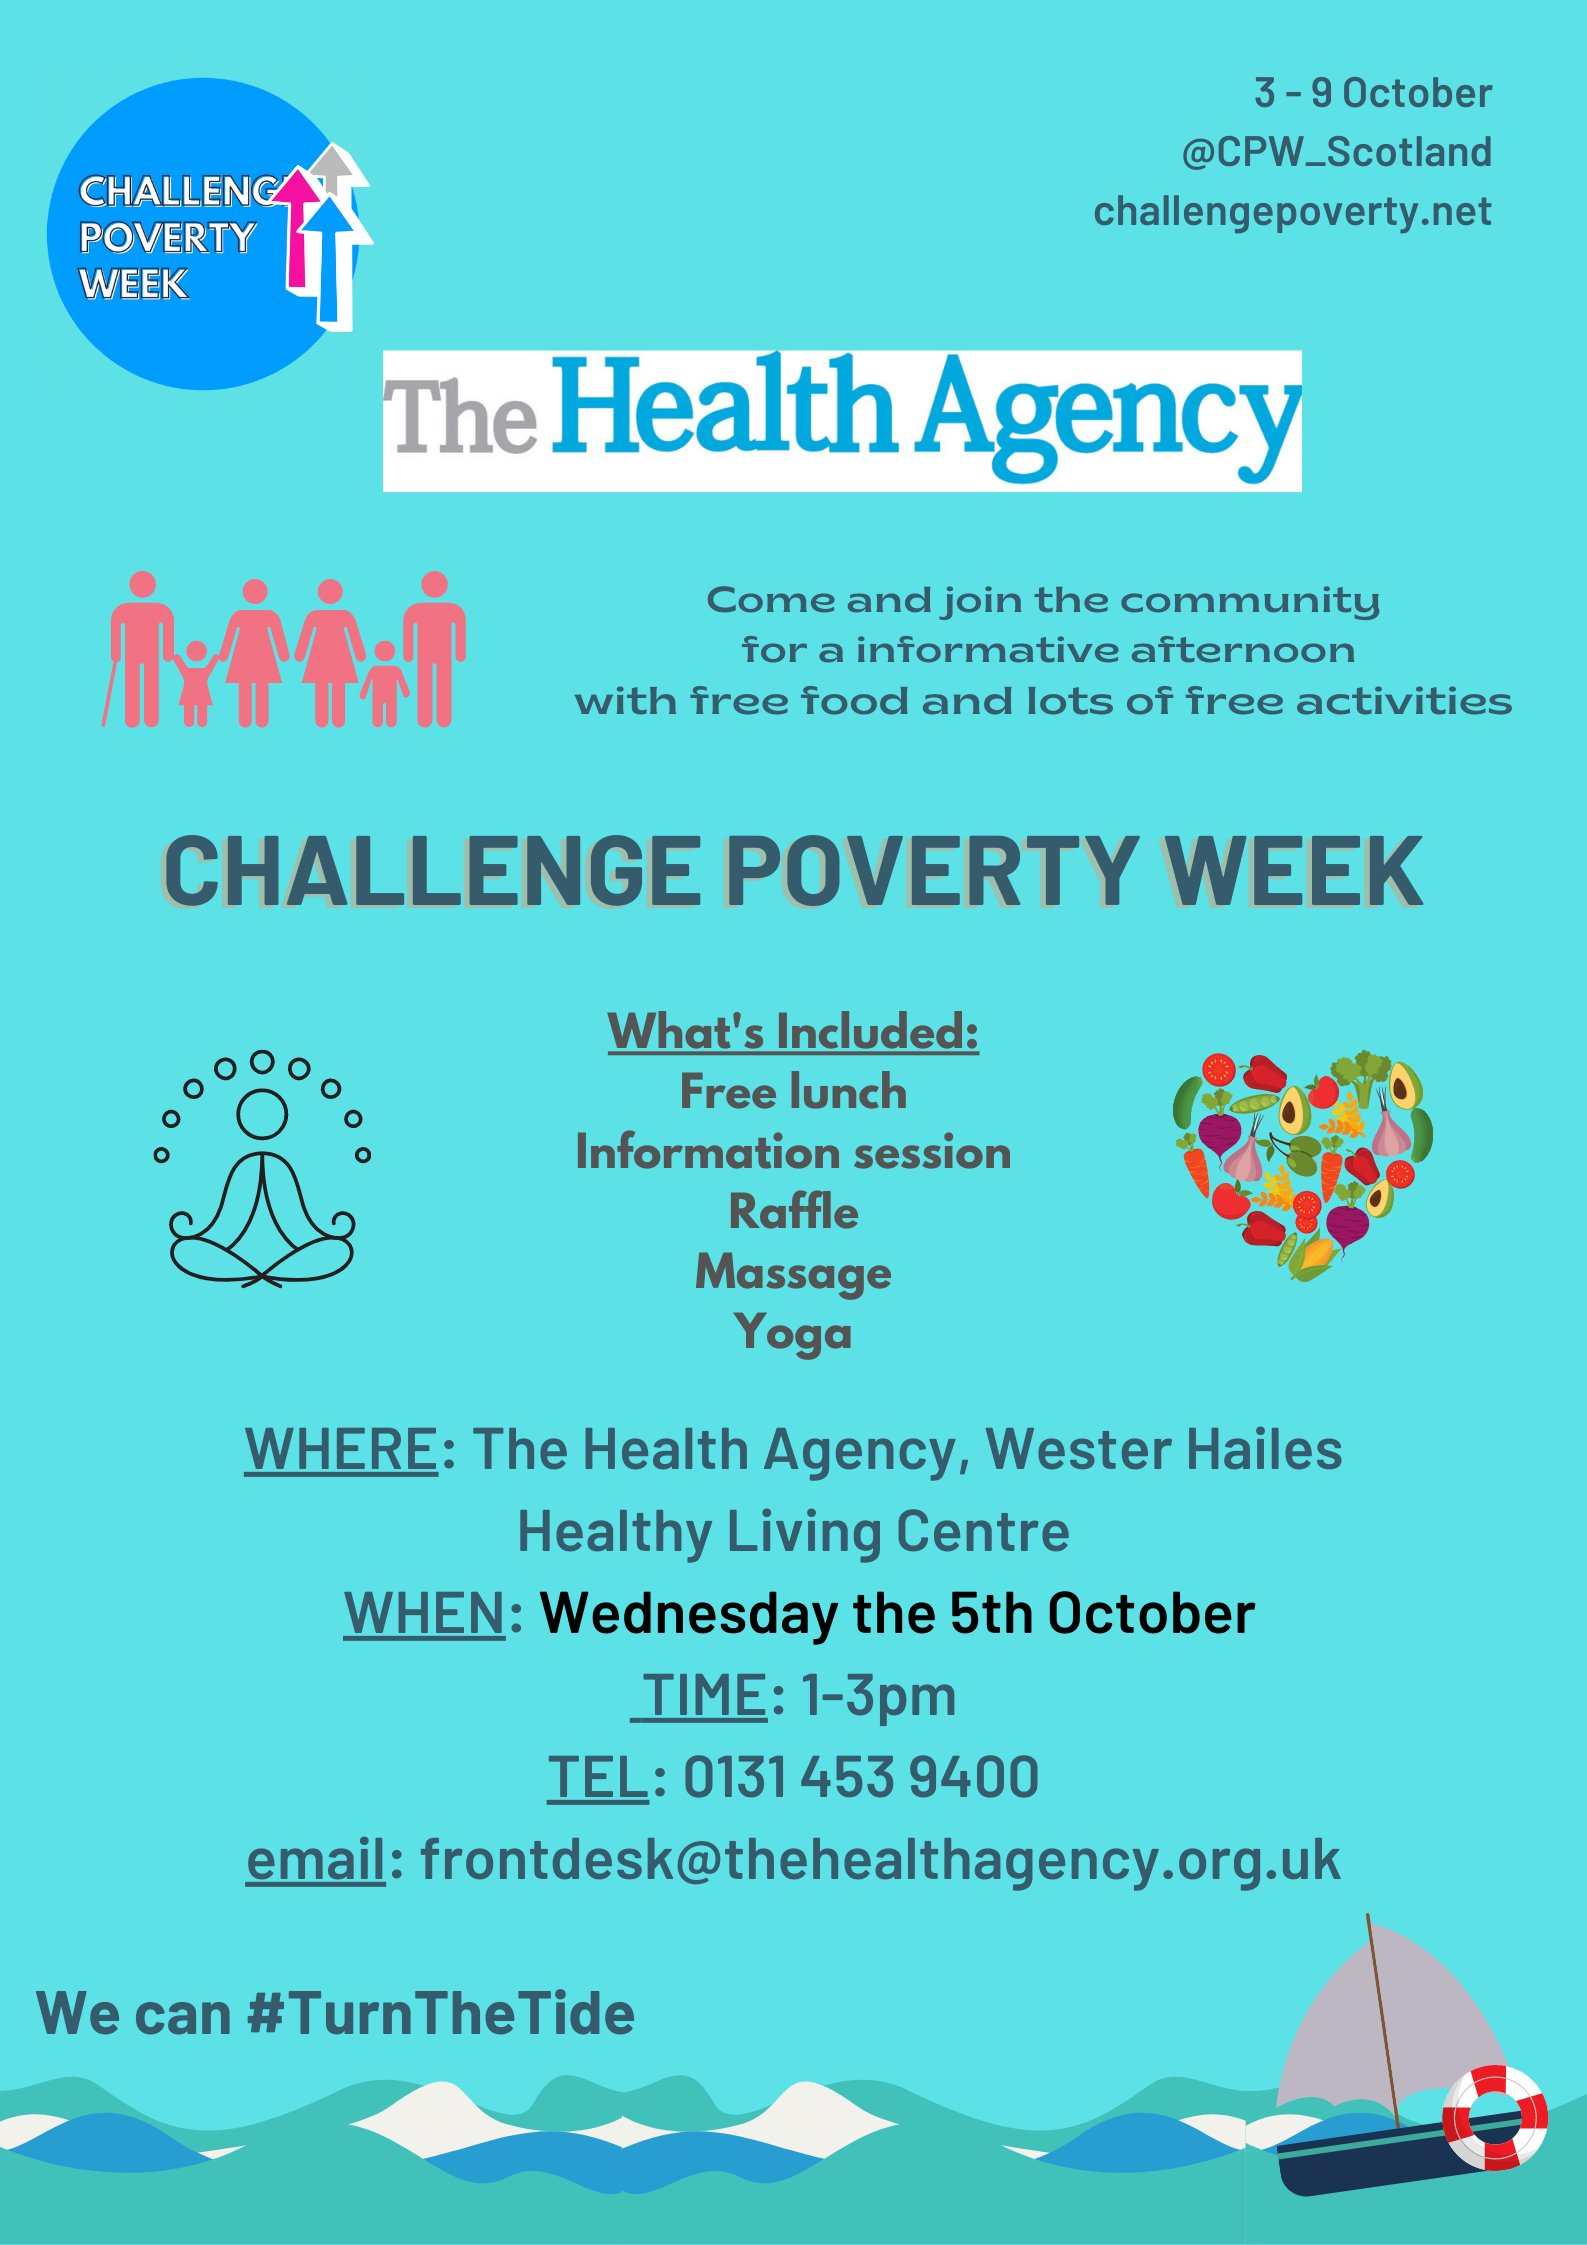 challenge poverty week chai the health agency Featured Image